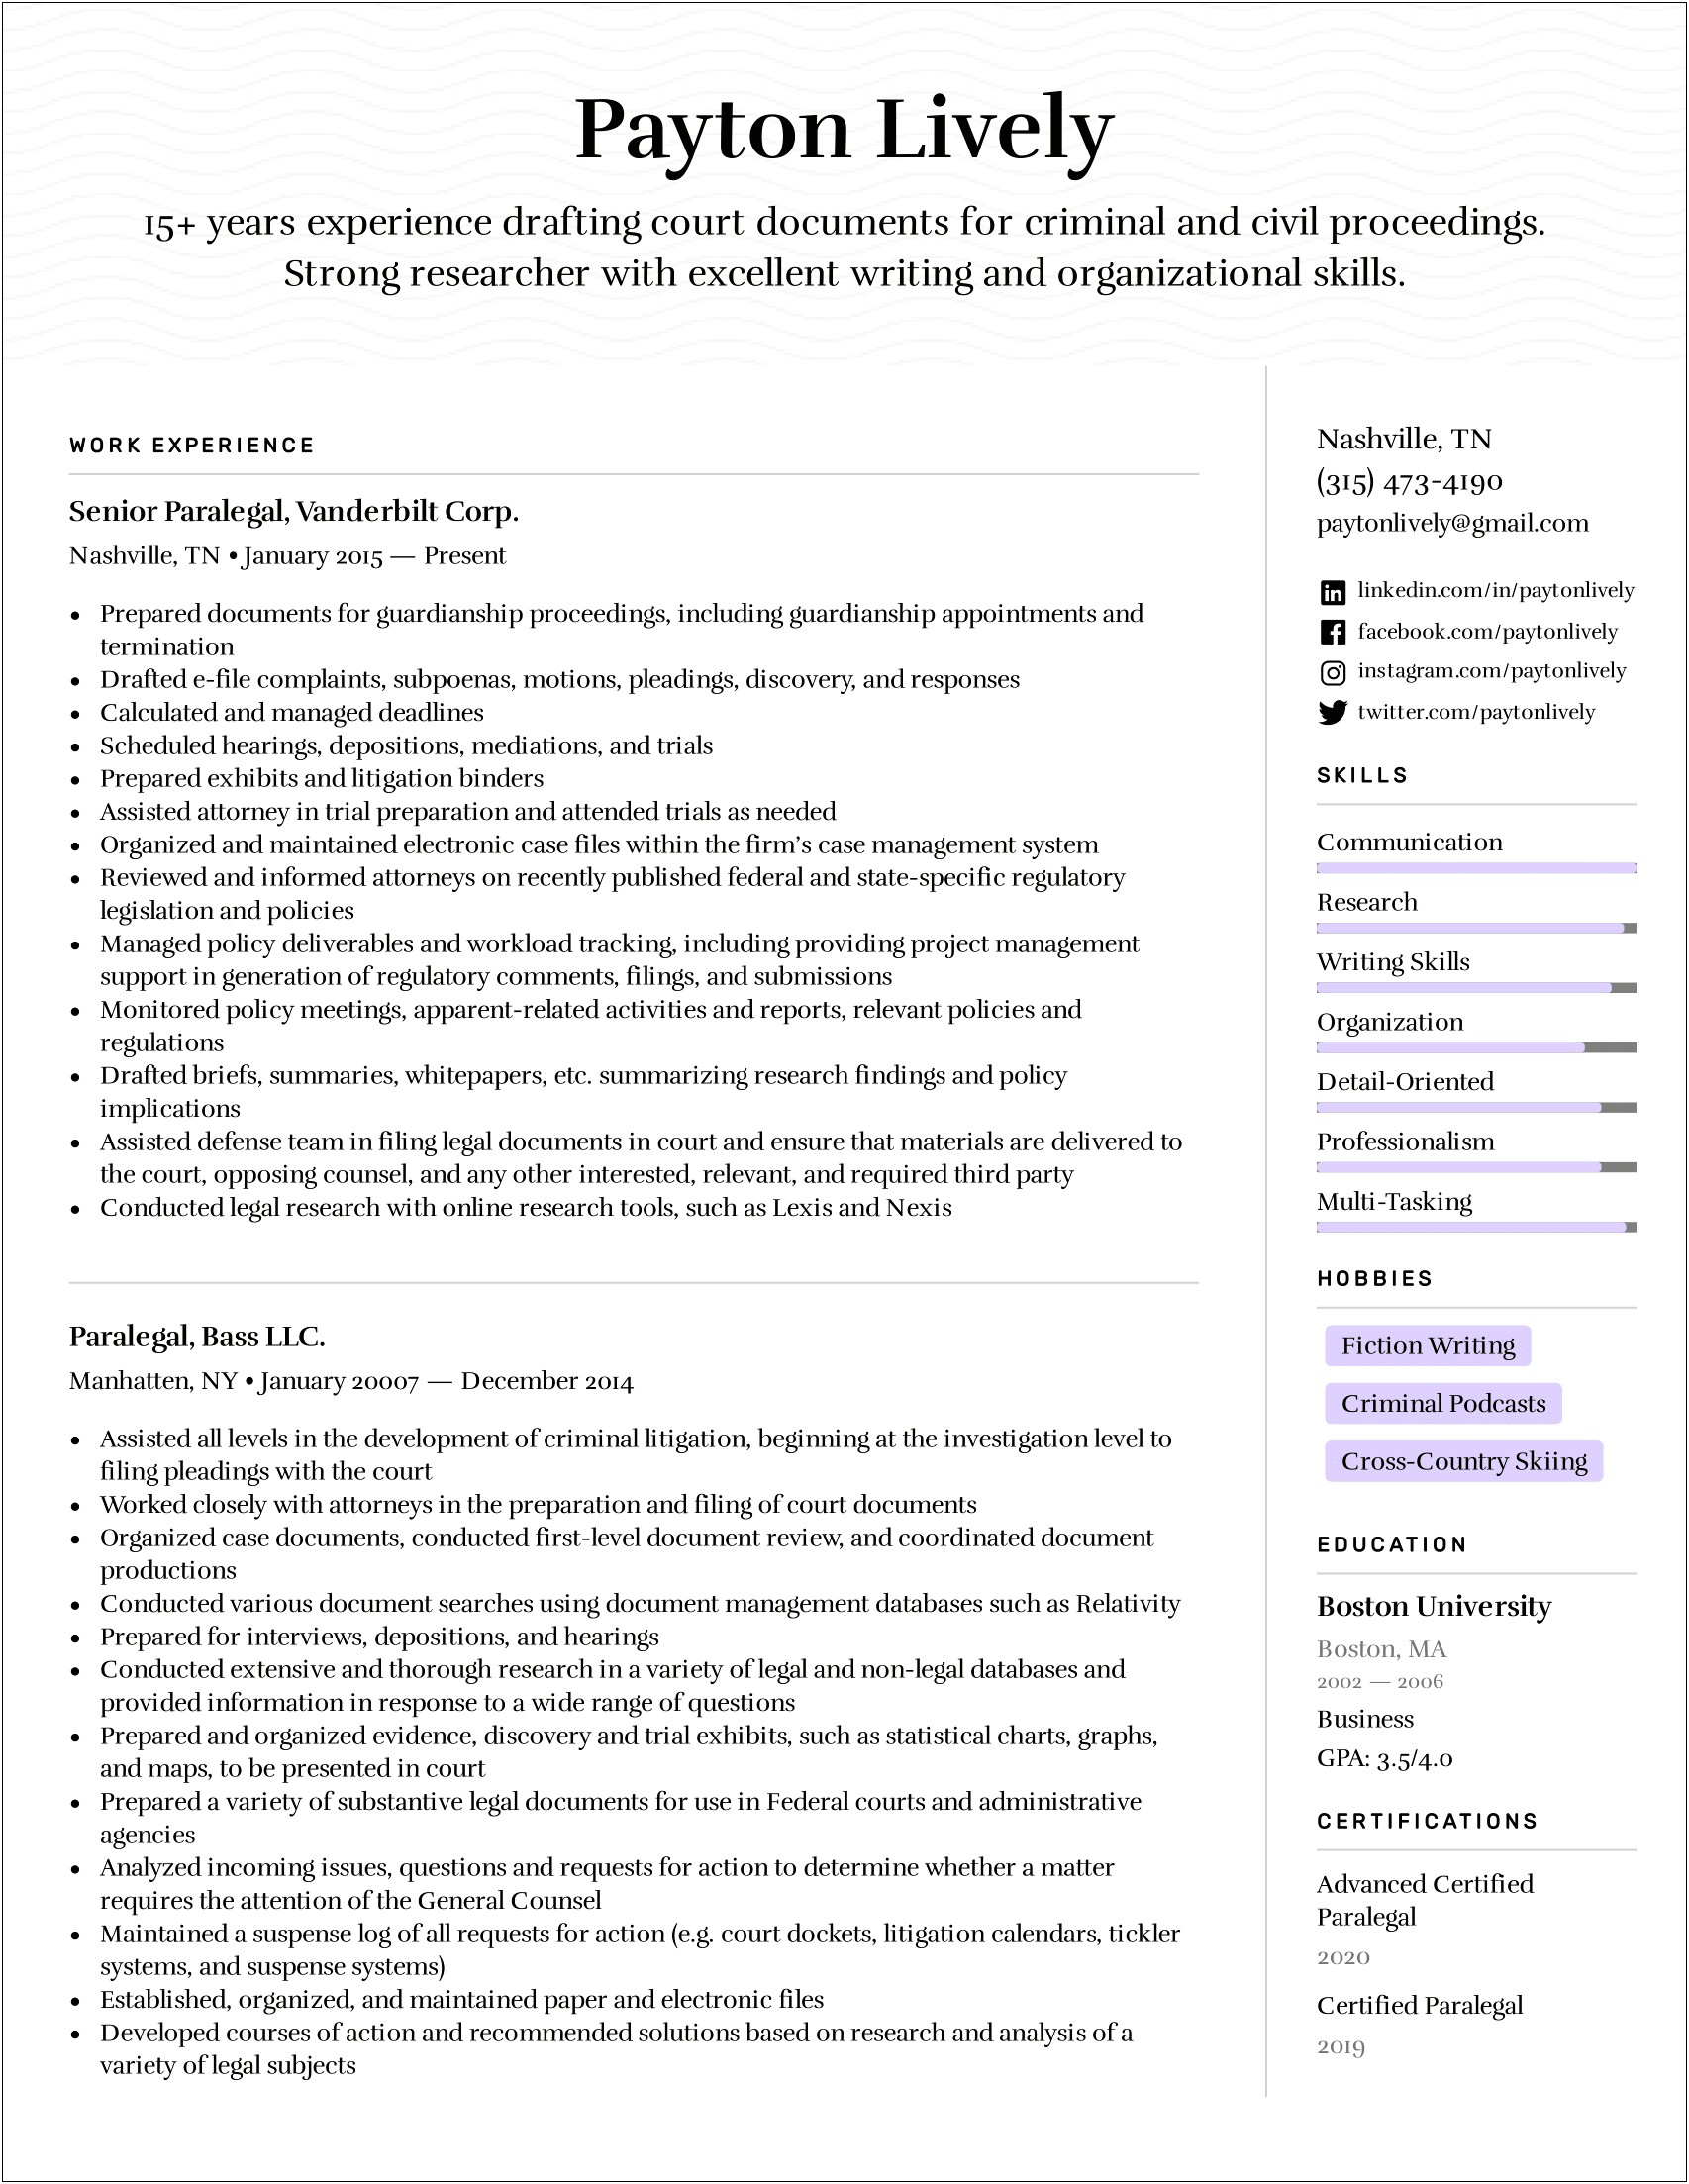 Examples Of Writing Skills In A Resume